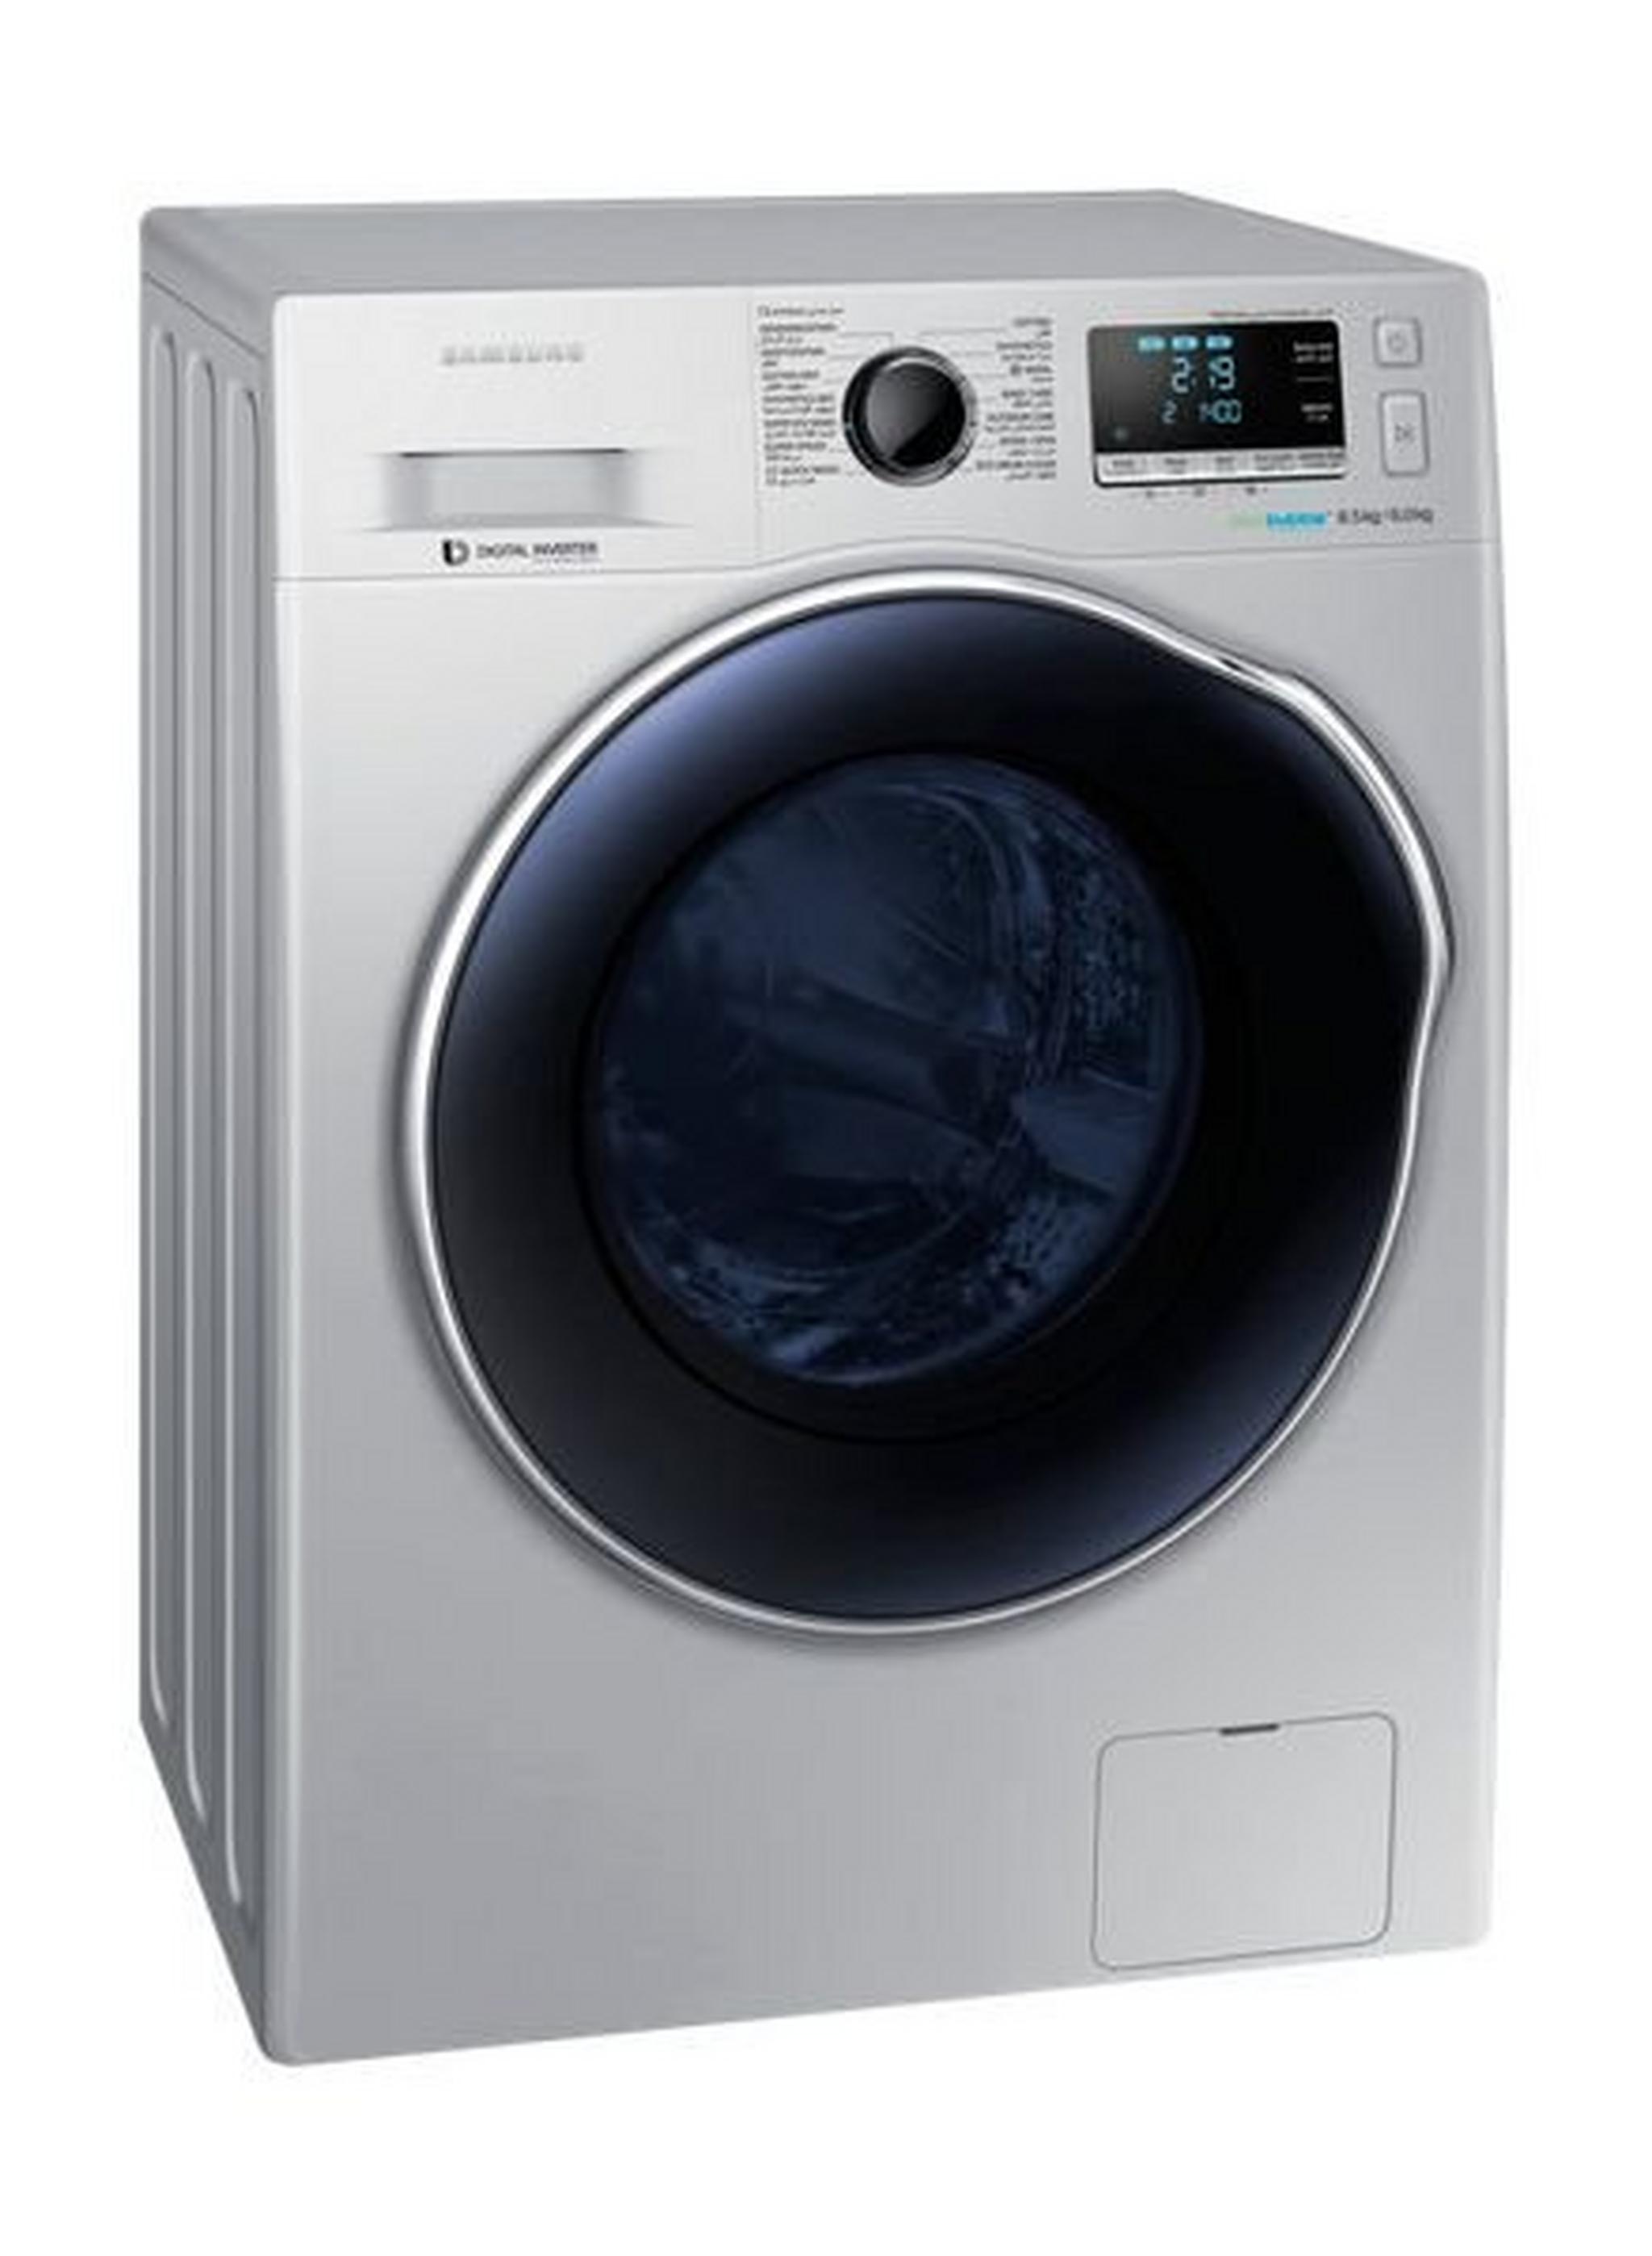 Samsung Front Loading Washer & Dryer 8.5 kg (WD85J6410AS) - Silver